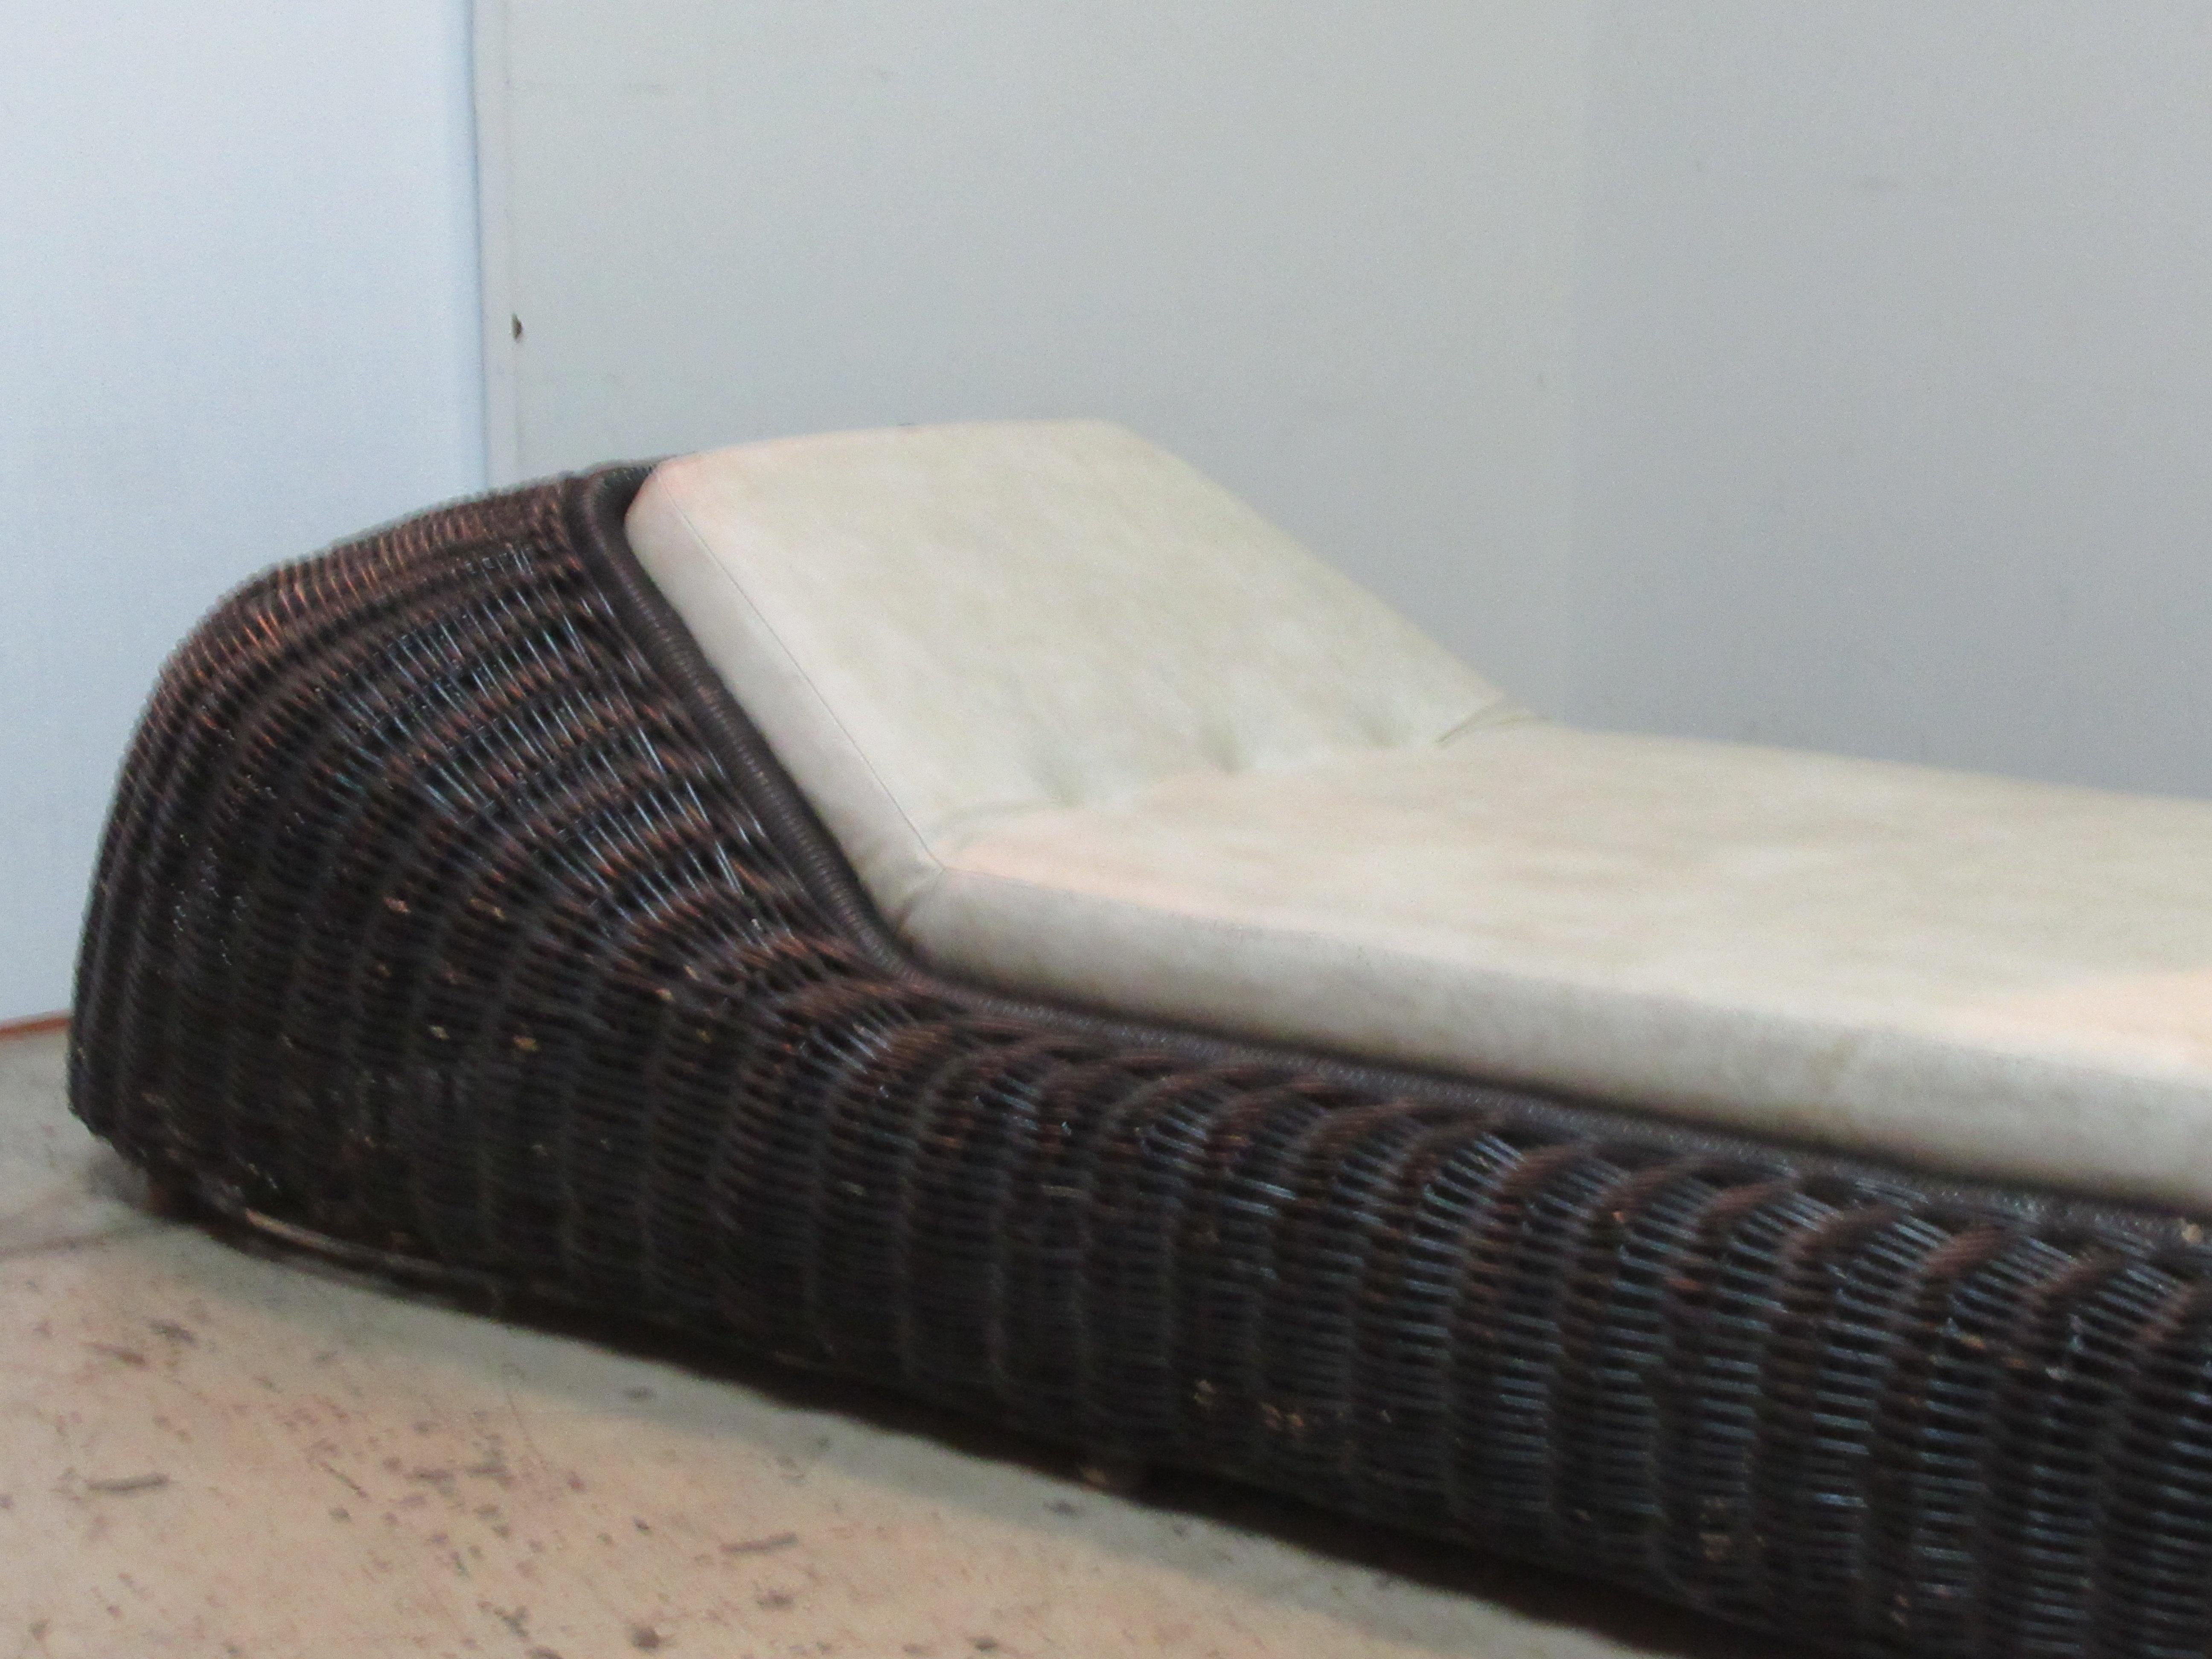    Vivai Del Sud Wicker Chaise Lounge, Italy 1970's For Sale 5